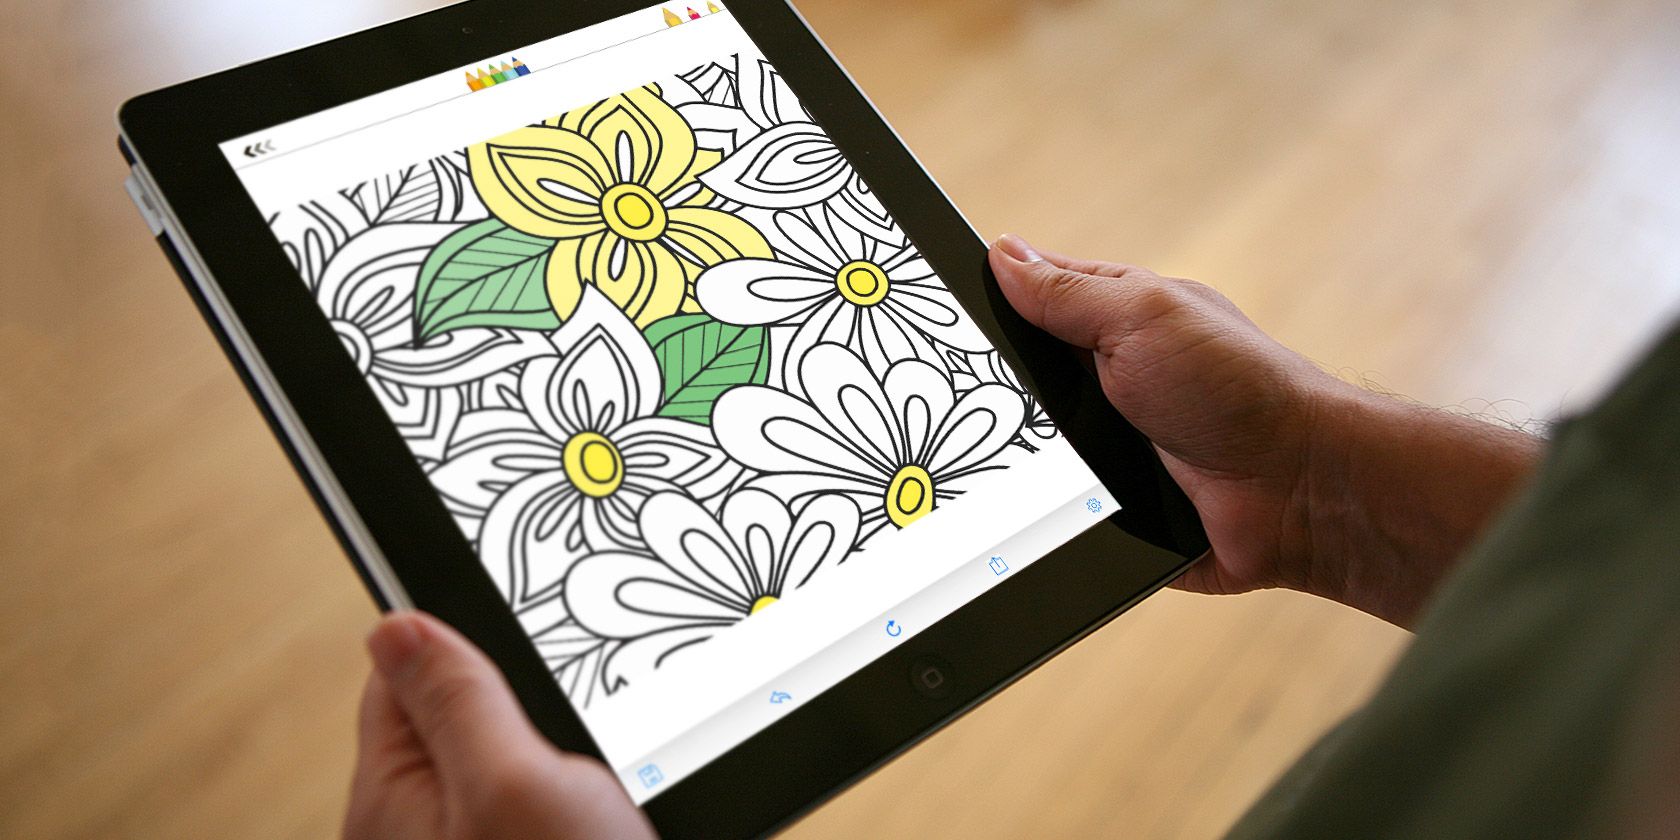 ipad-coloring-book-apps-for-adults-to-help-you-relax-unwind